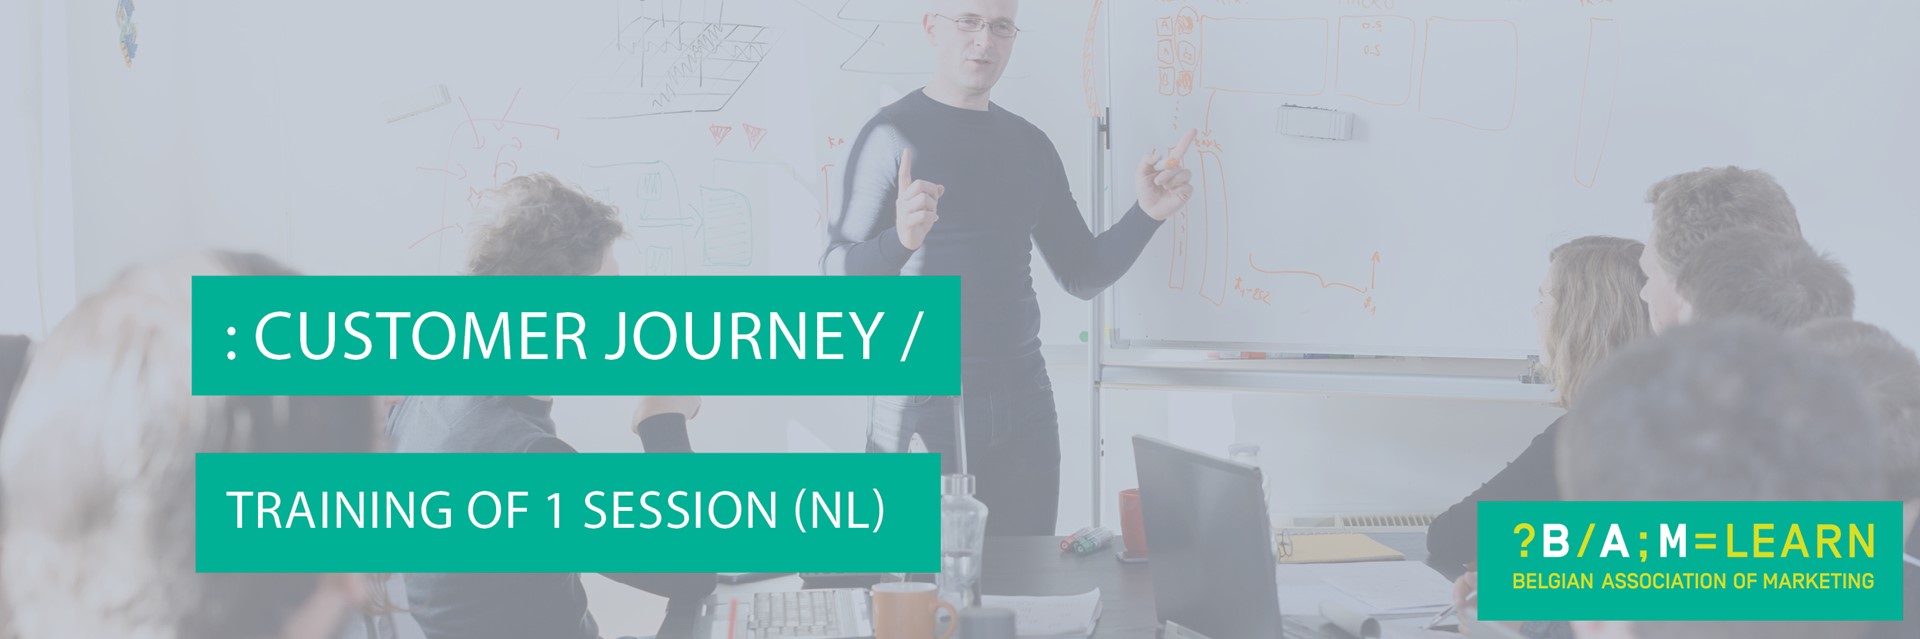 Discover_customer journey